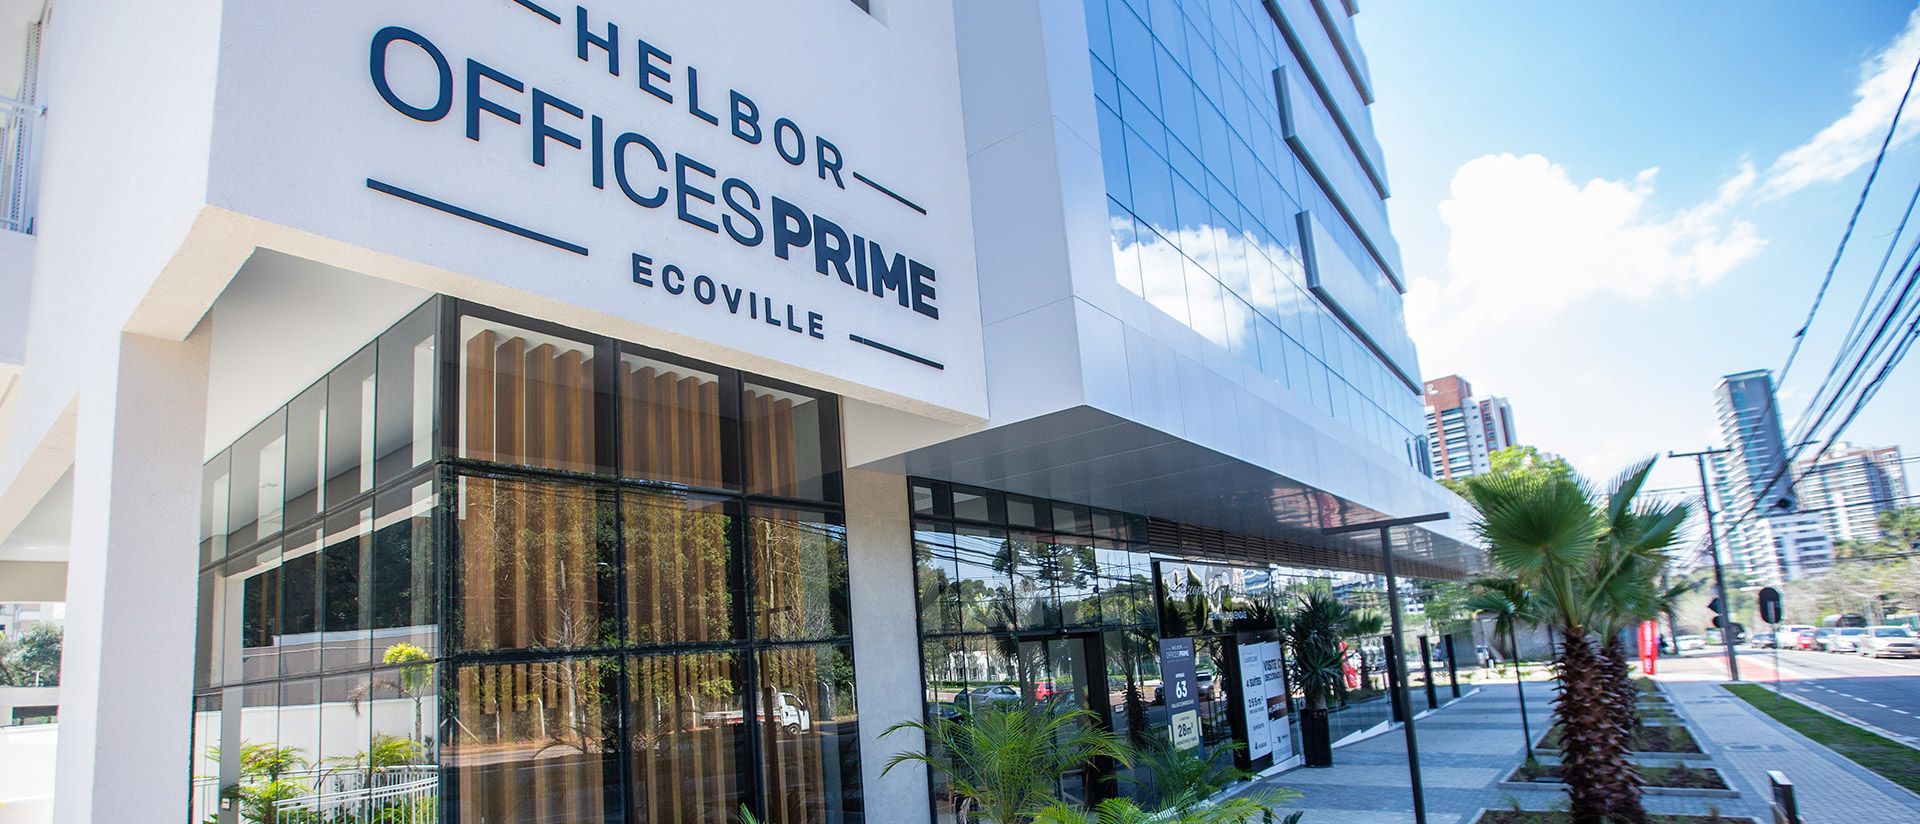 Helbor-Offices-Prime-Acesso.jpg